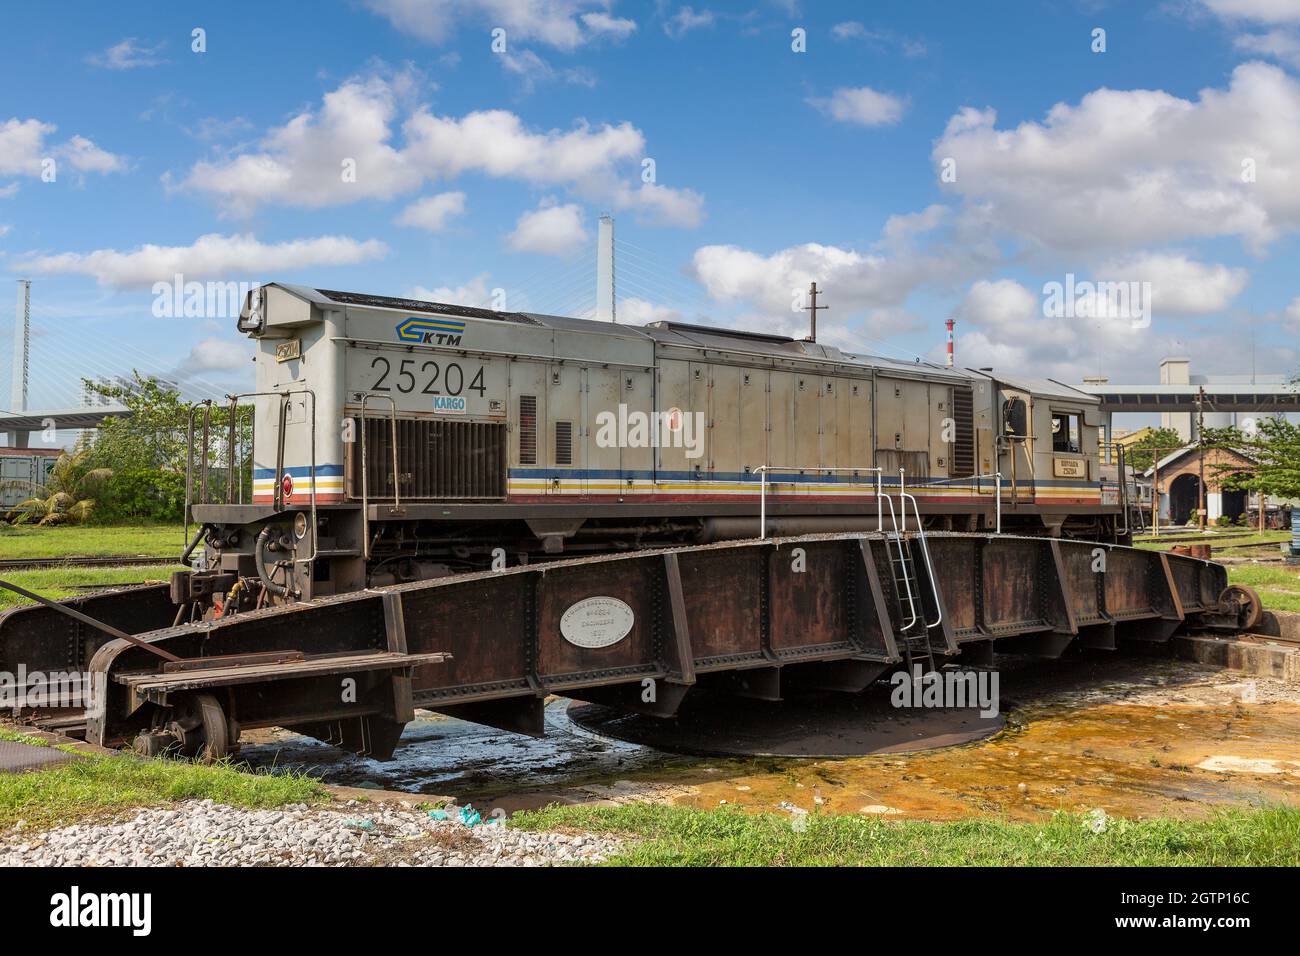 KTM 25 Class Locomotive 25204 Mutiara on a revolving turntable located in Penang Malaysia. Made in Carlisle UK in 1927 by Cowans Sheldon and Co Ltd. Stock Photo